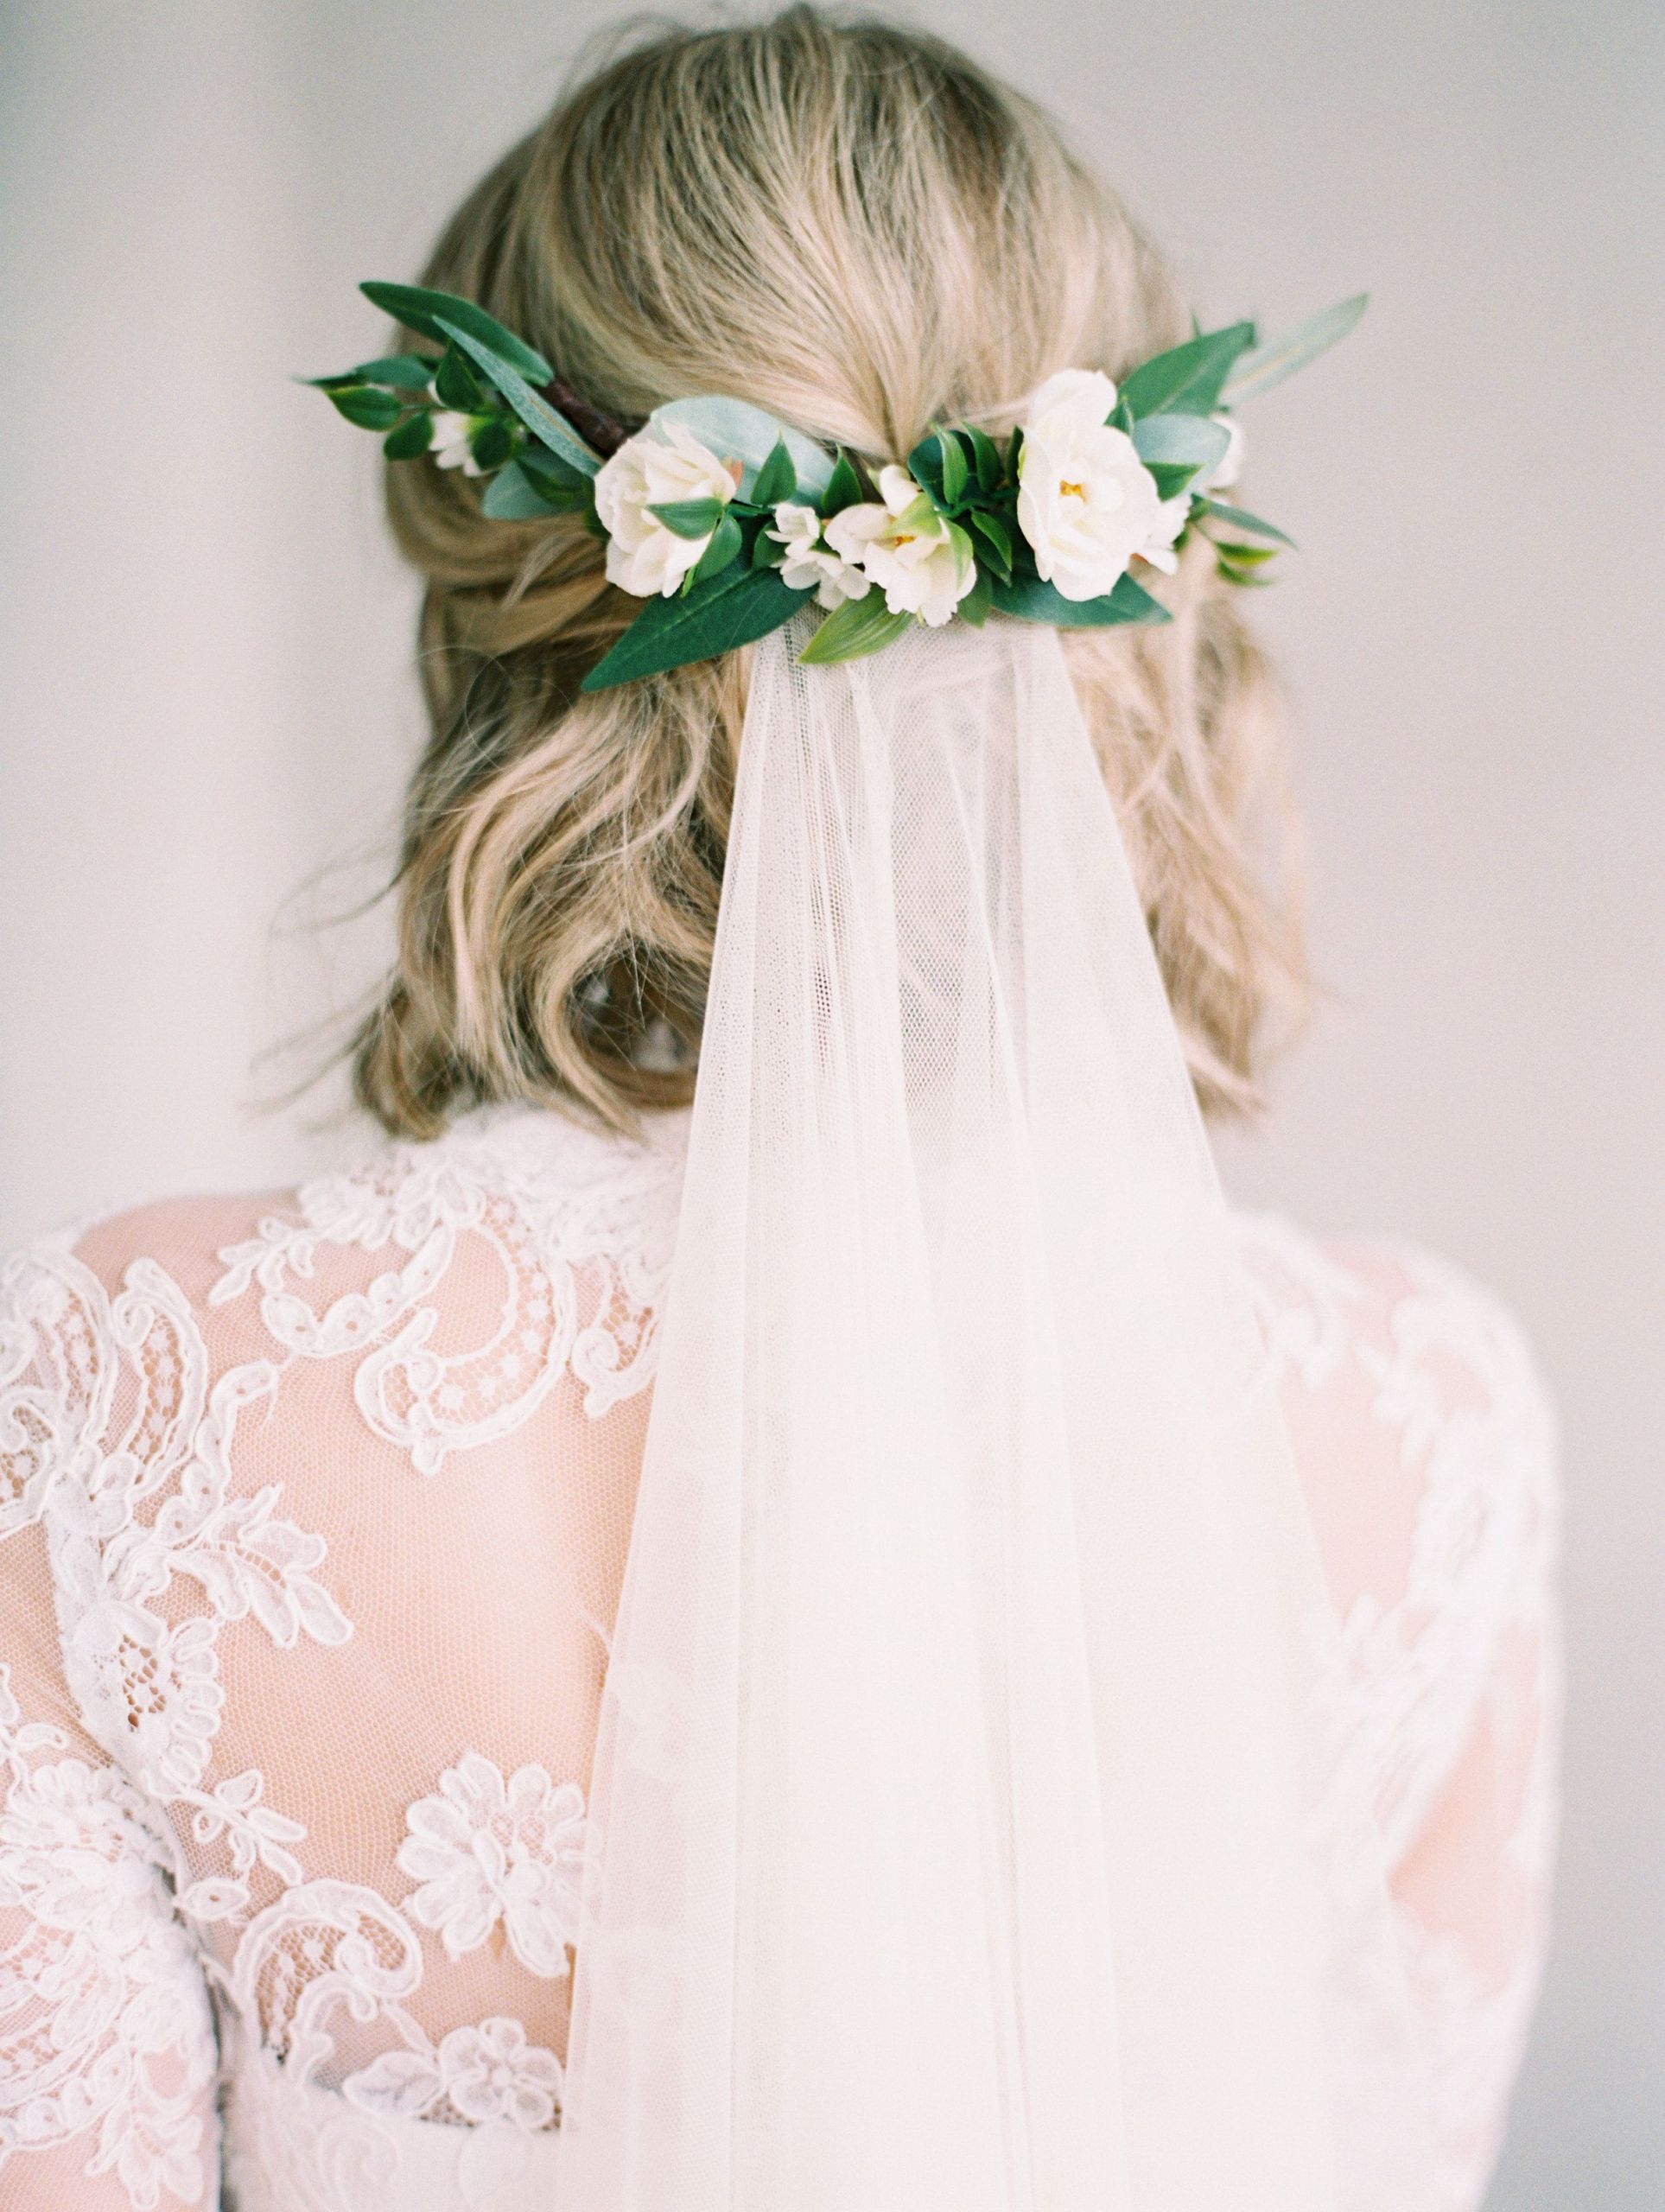 Wedding Veils With Flowers In Hair
 Ester Floral b created with Eucalyptus and Olive Leaves